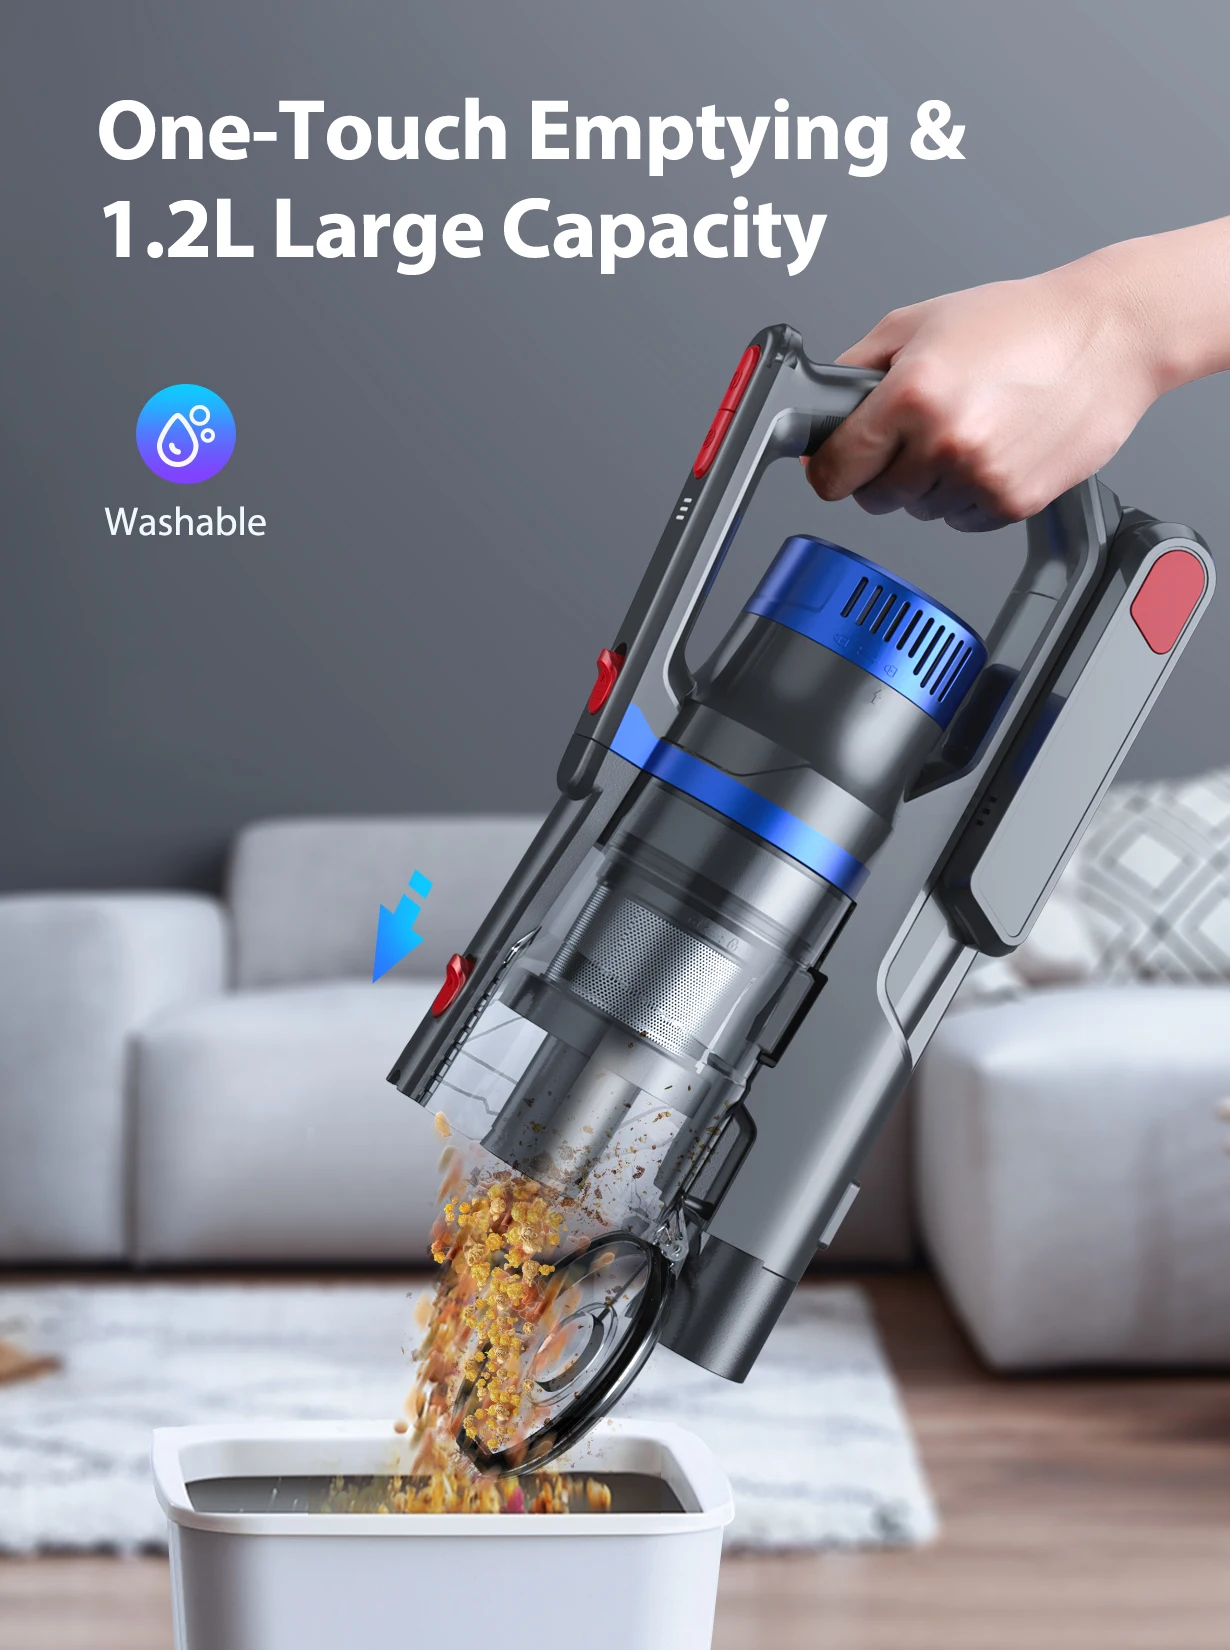 55 Mins 36KPA Suction Power 450W Cordless vacuum cleaners for pet home appliance 1.2L Dust Cup Removable Battery Handheld JR500 images - 6